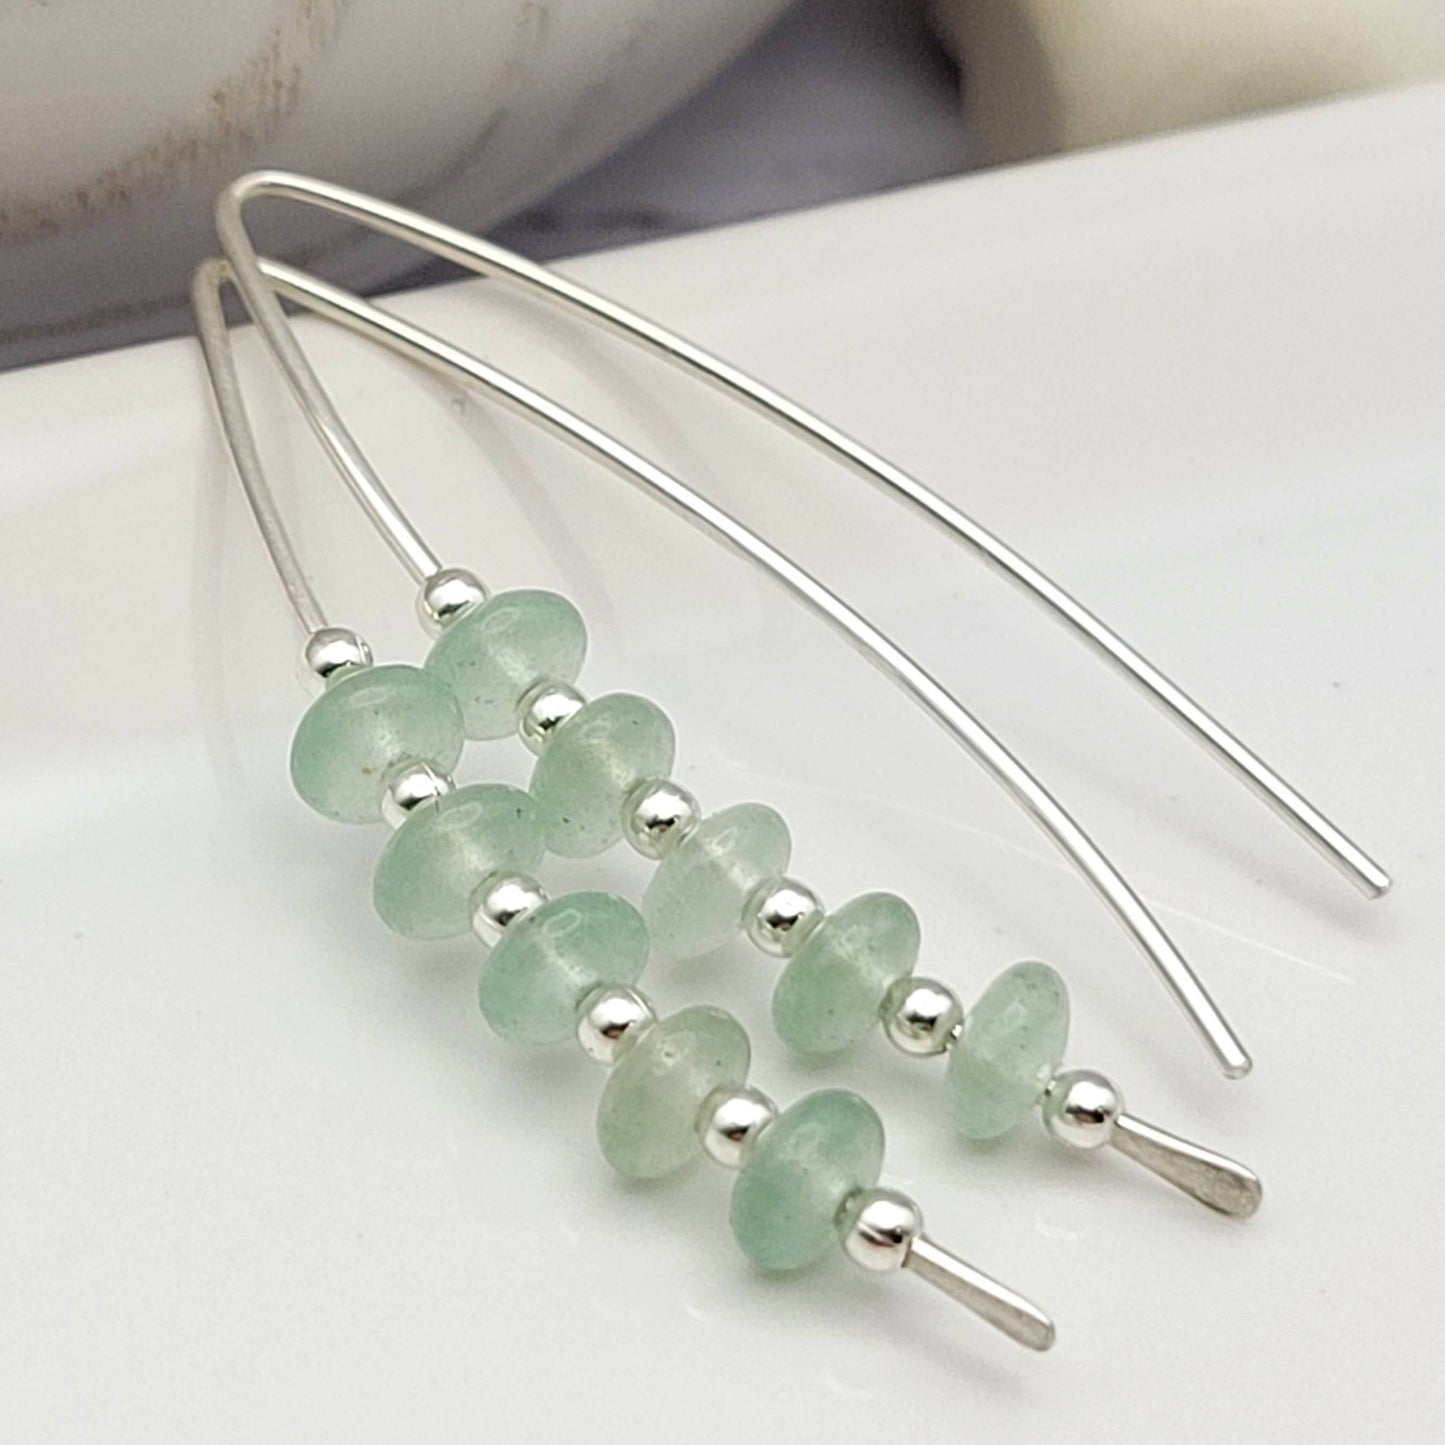 Green Aventurine and Sterling Silver Threaders